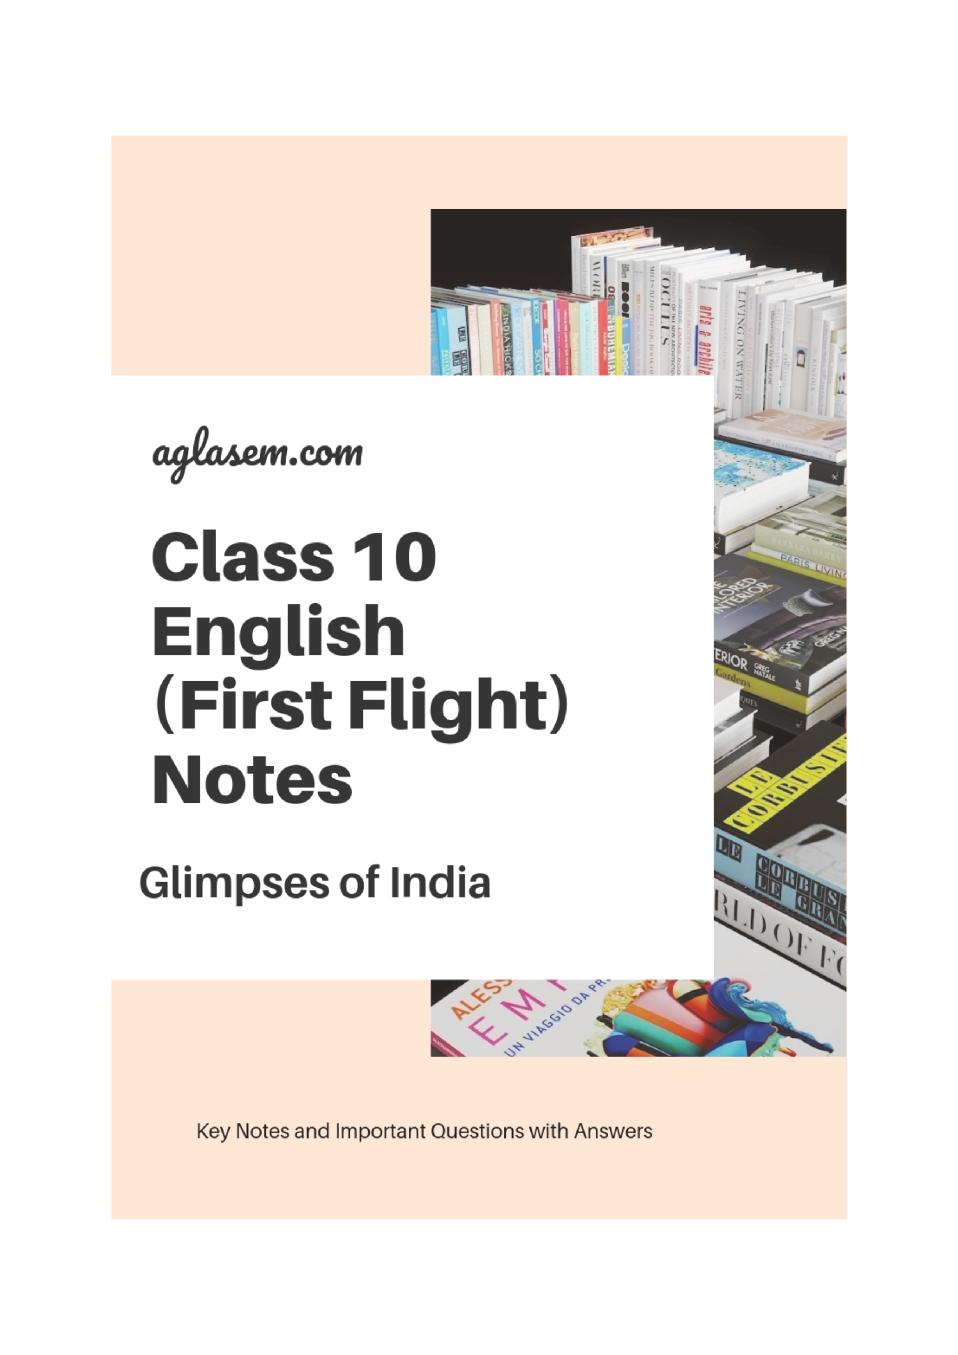 Class 10 English First Flight Notes For Glimpses of India - Page 1